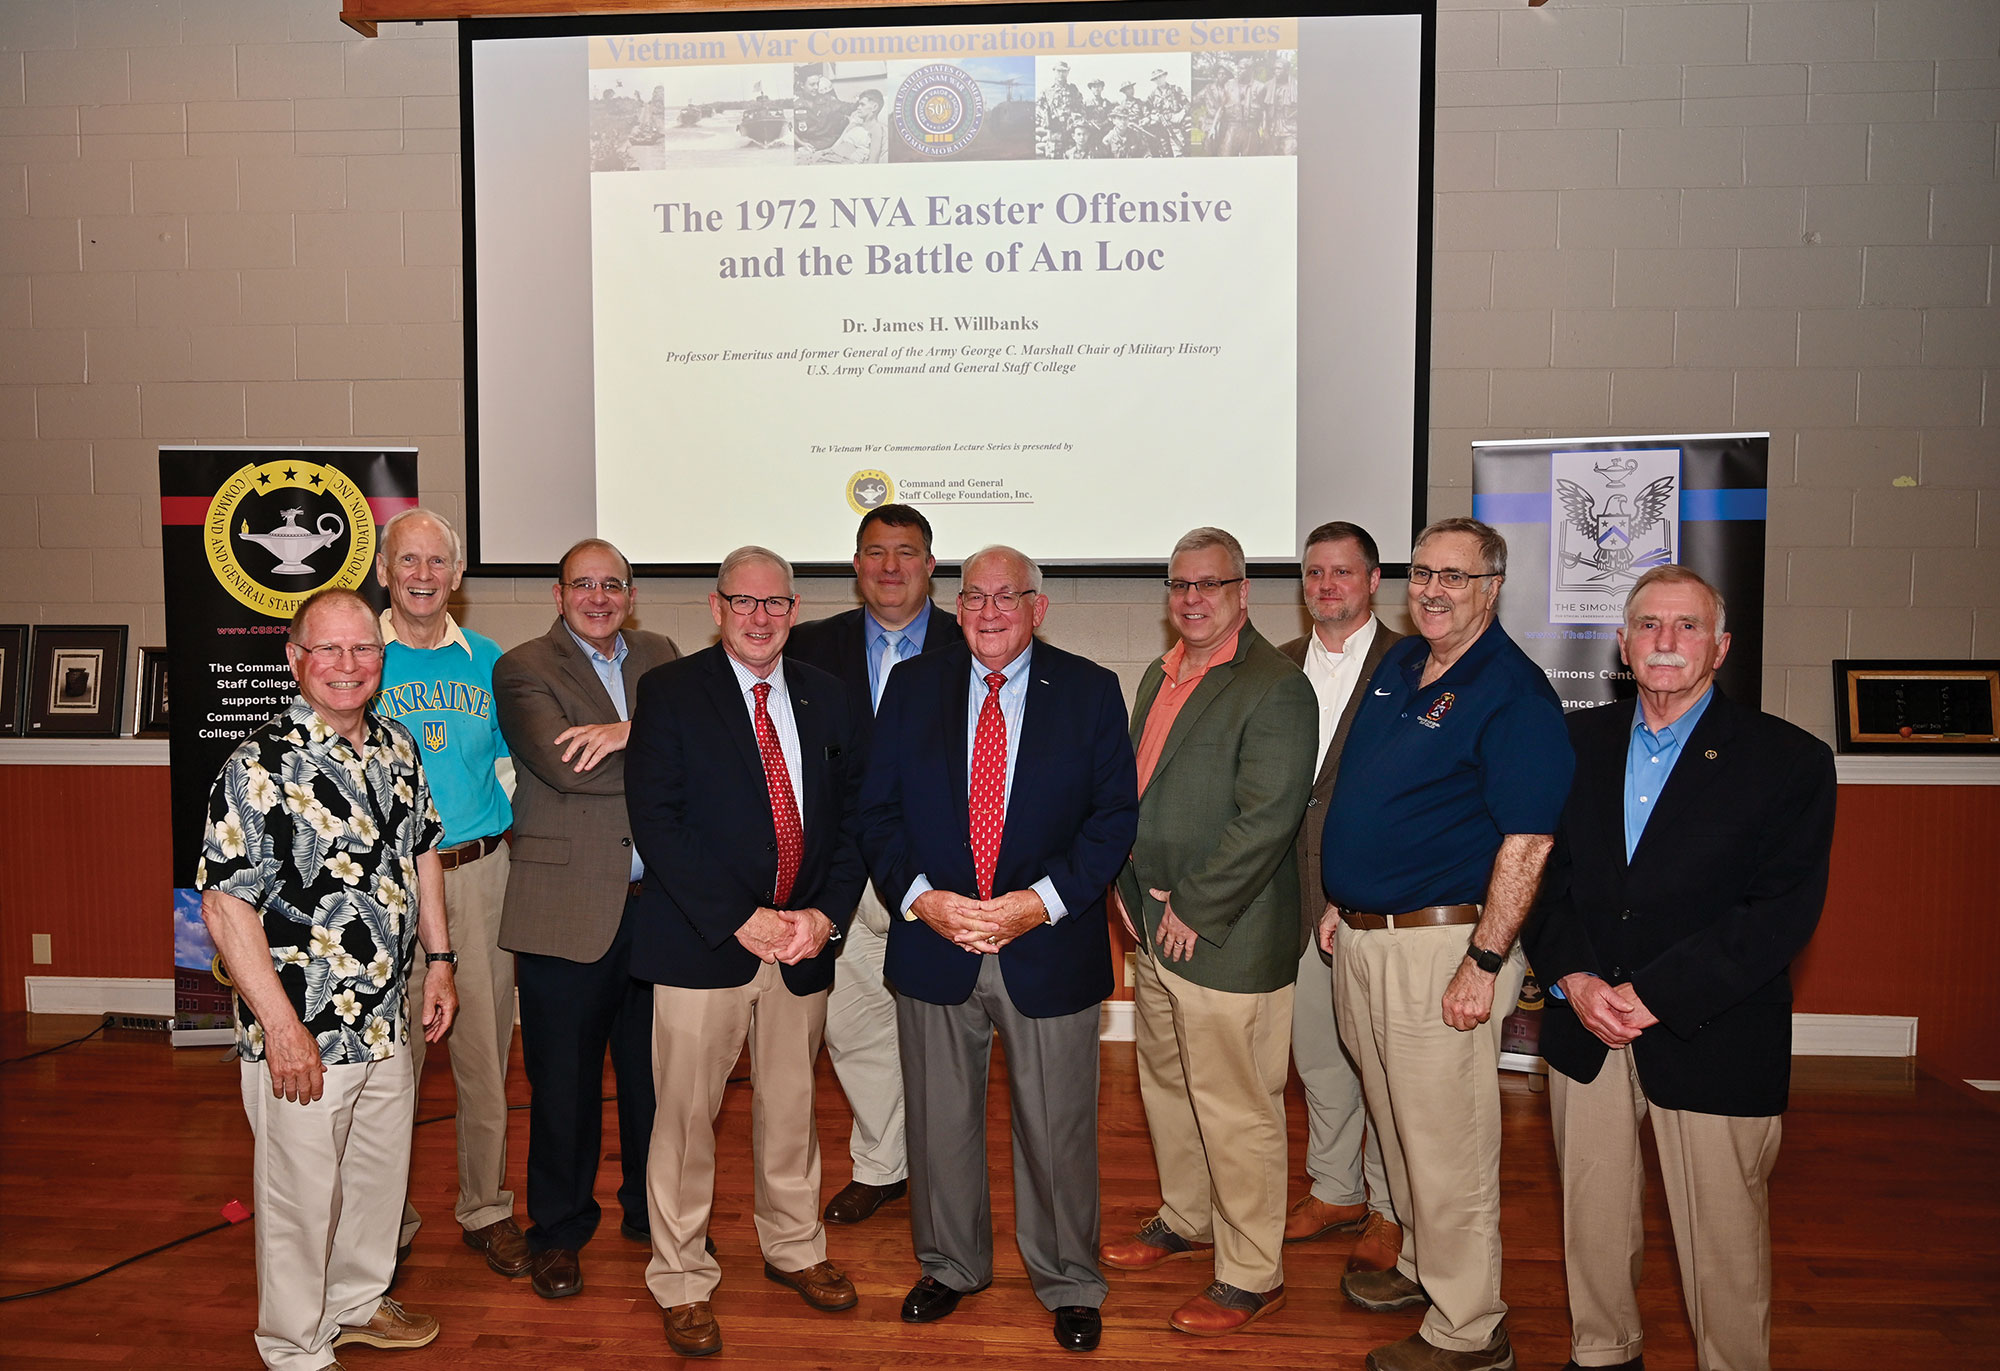 Dr. James H. Willbanks, CGSC Professor Emeritus, gathers with some of his old CGSC colleagues after his lecture  for the CGSC Foundation's Vietnam War Commemoration Lecture Series on May 12, 2022, at June's Northland in downtown Leavenworth, Kansas.